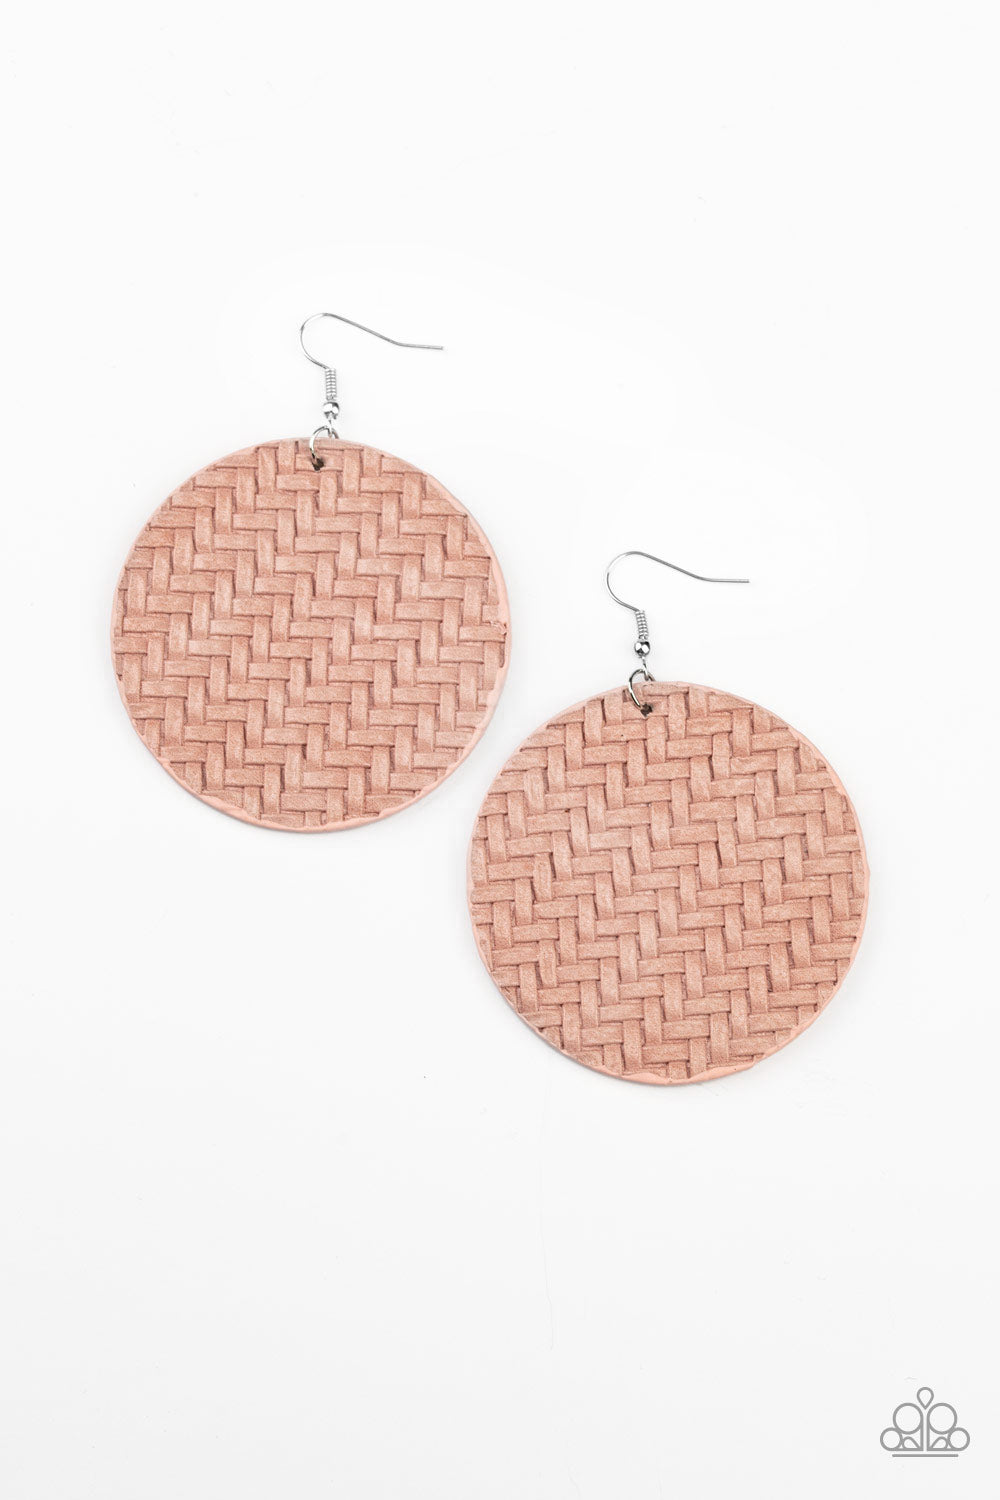 Paparazzi Plaited Plains - Coral Pink Earrings - A Finishing Touch 